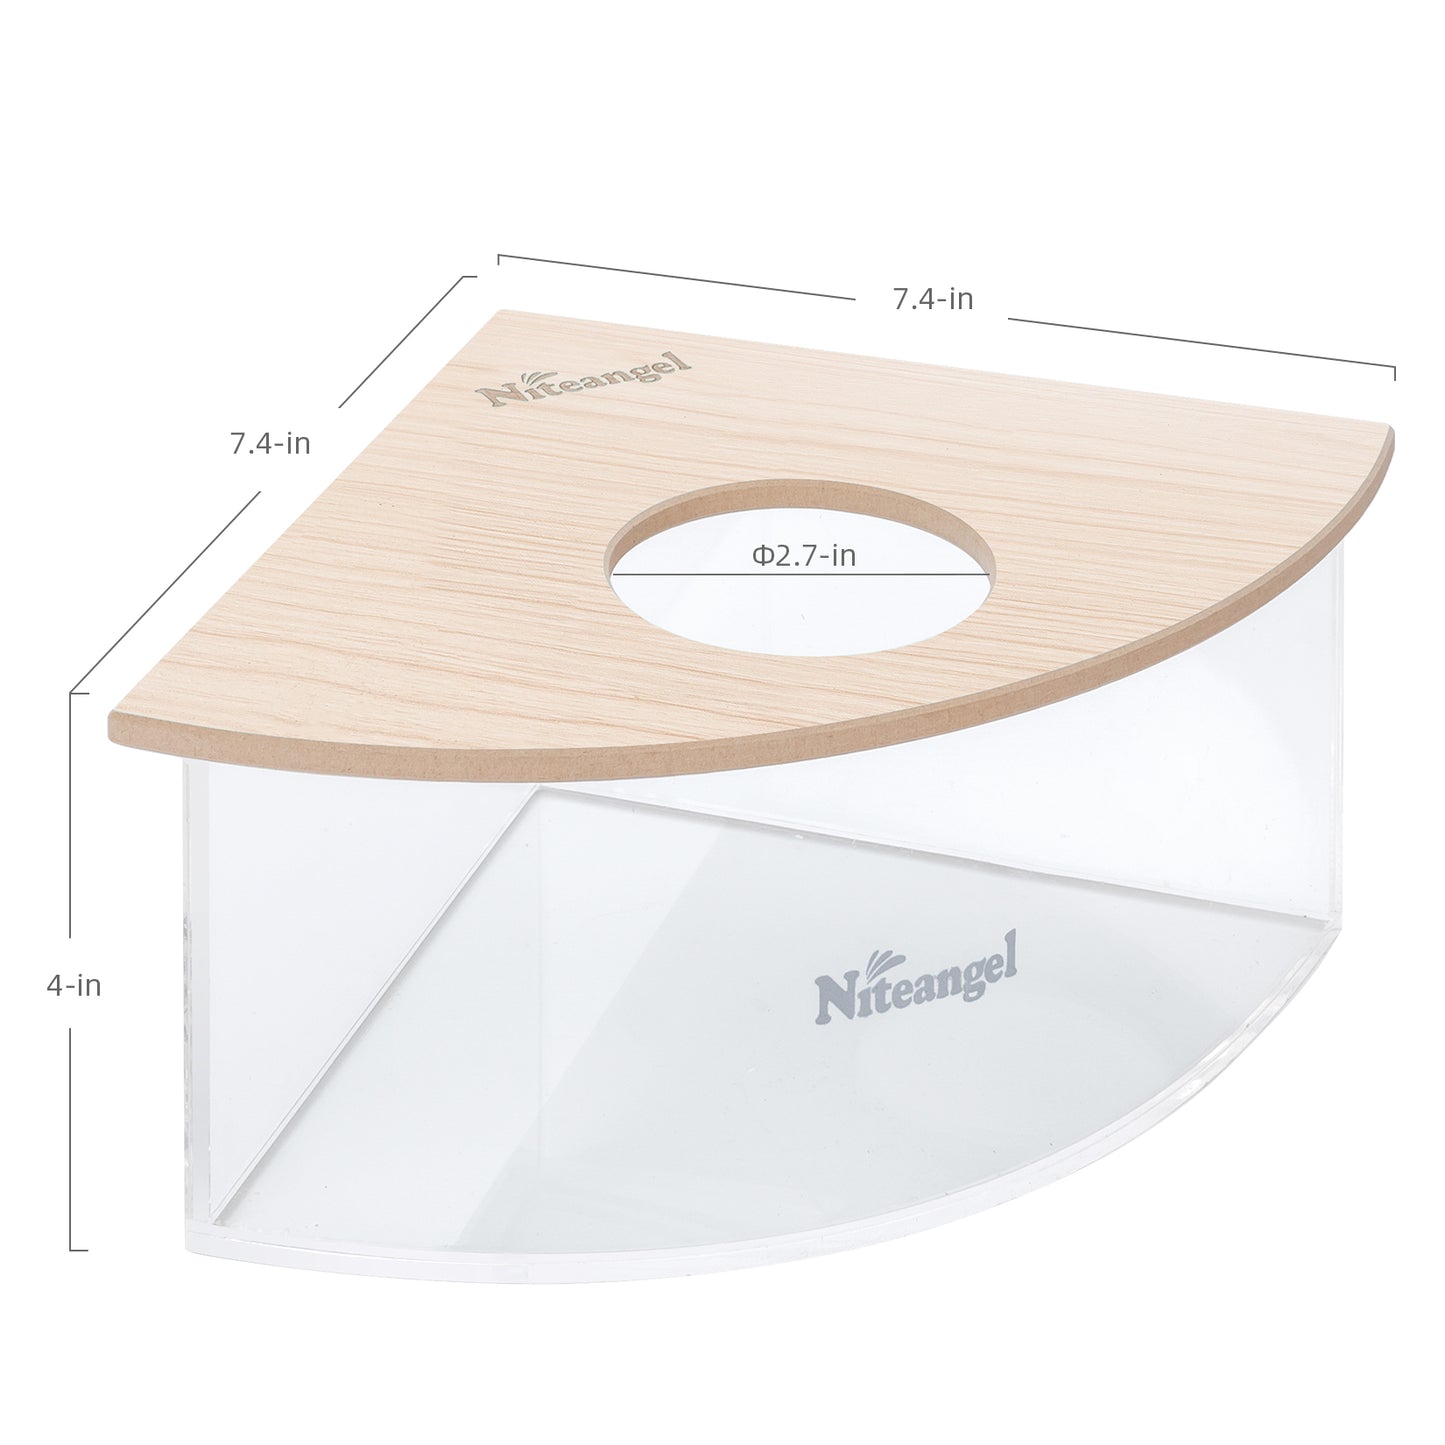 Niteangel Animal Sand-Bath Box: - Acrylic Critter's Sand Bath Shower Room & Digging Sand Container for Hamsters Mice Lemming Gerbils or Other Small Pets